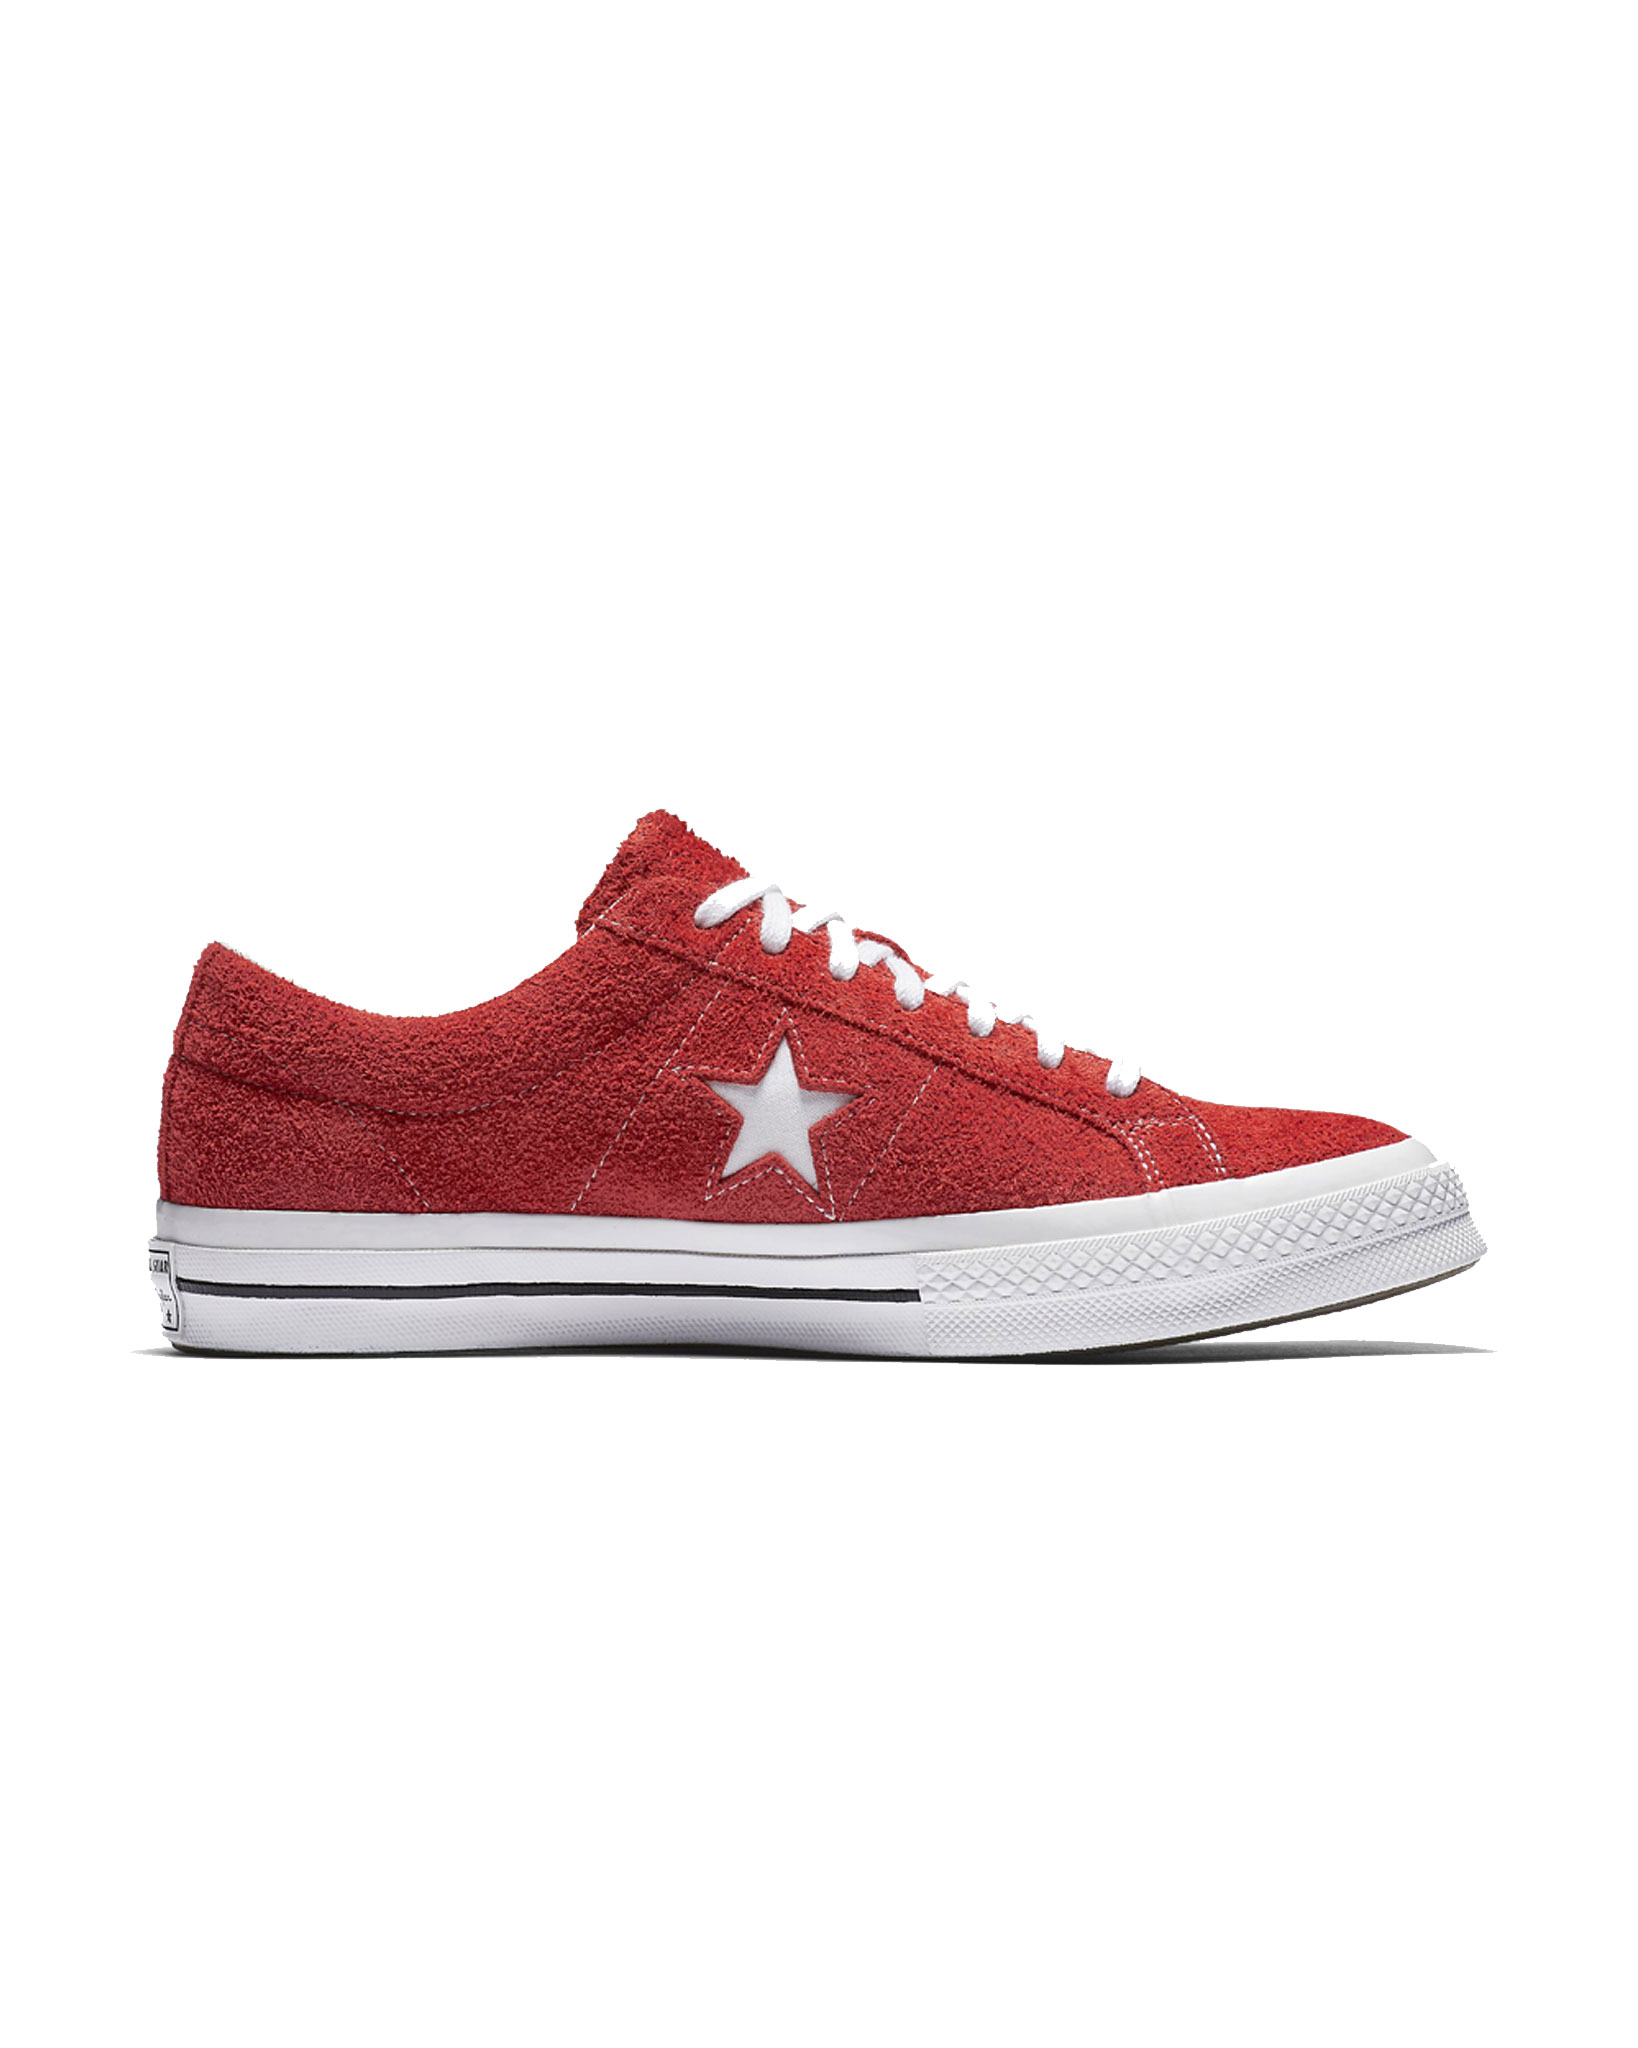 Converse One Star Ox Premium Suede (red)